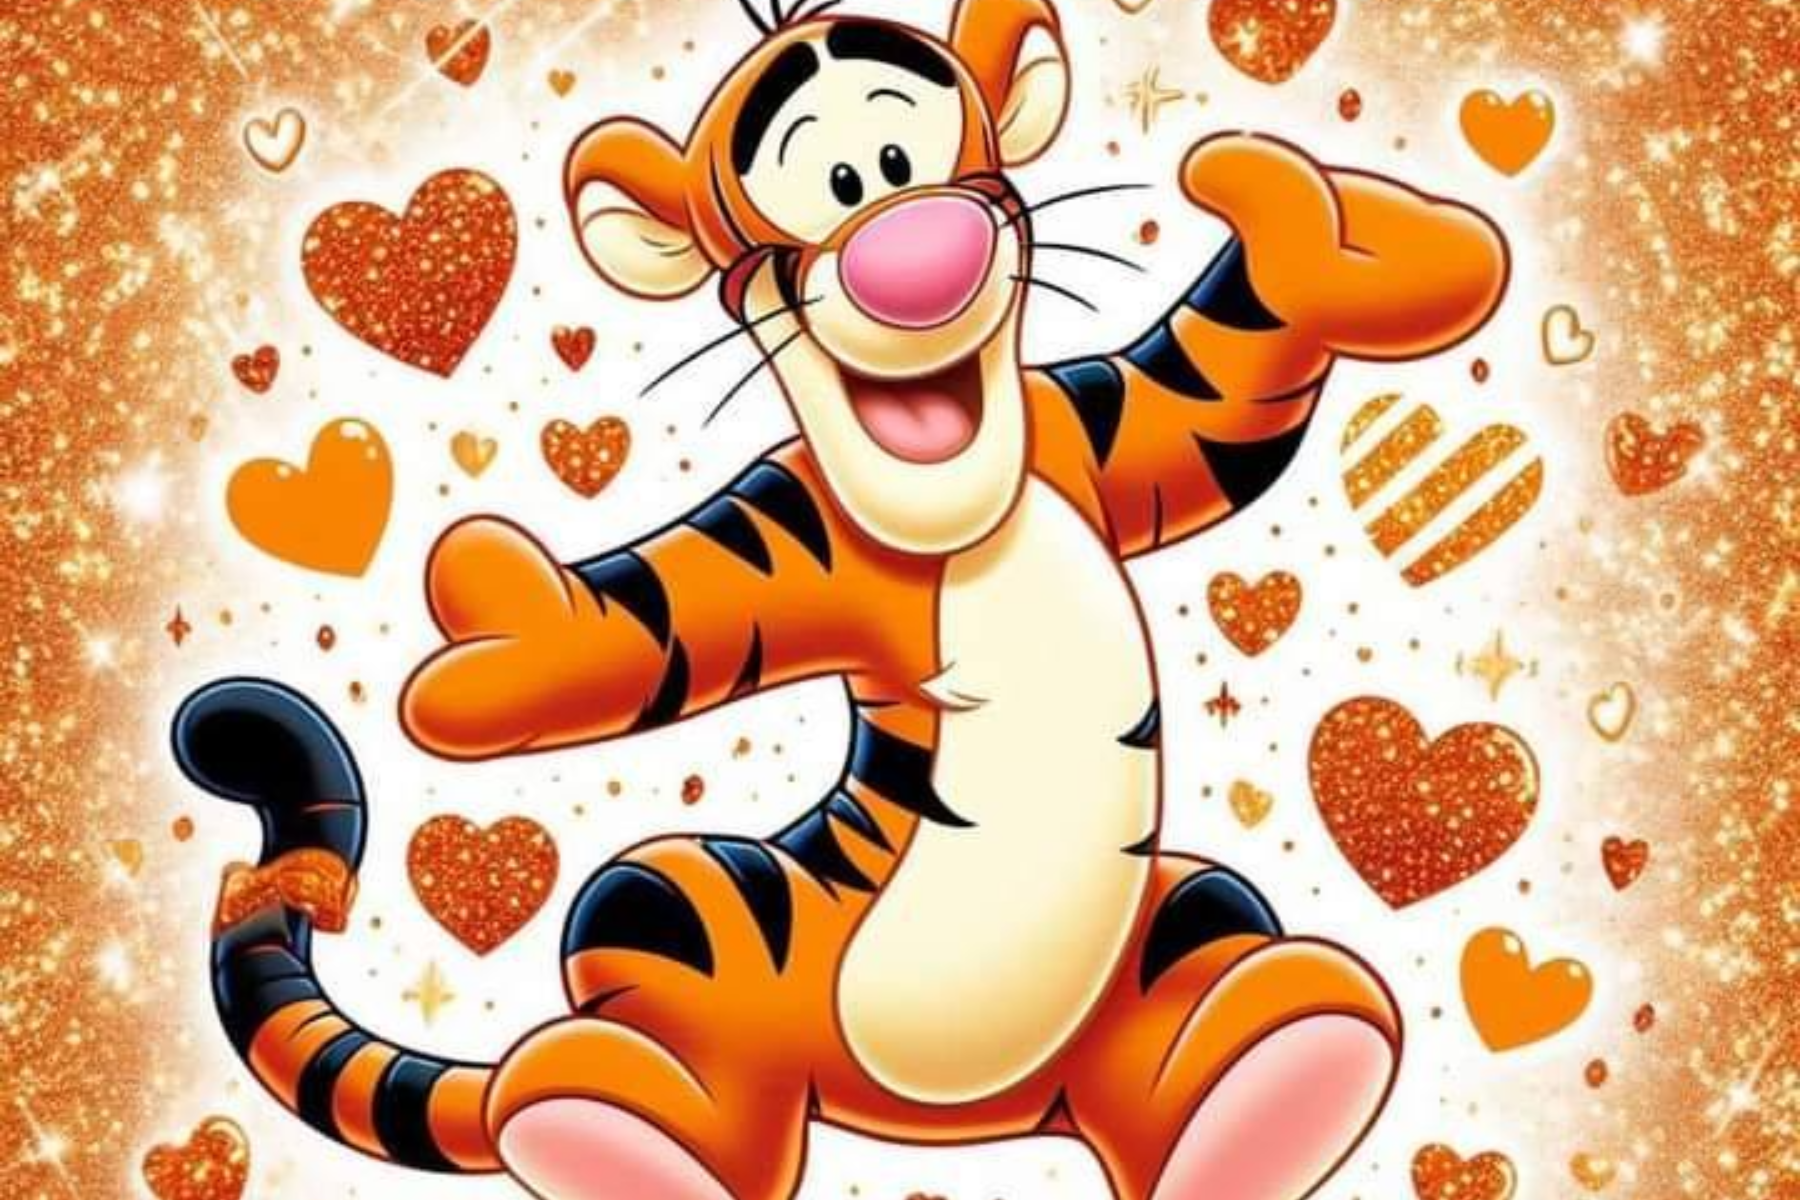 The Tigger is dancing